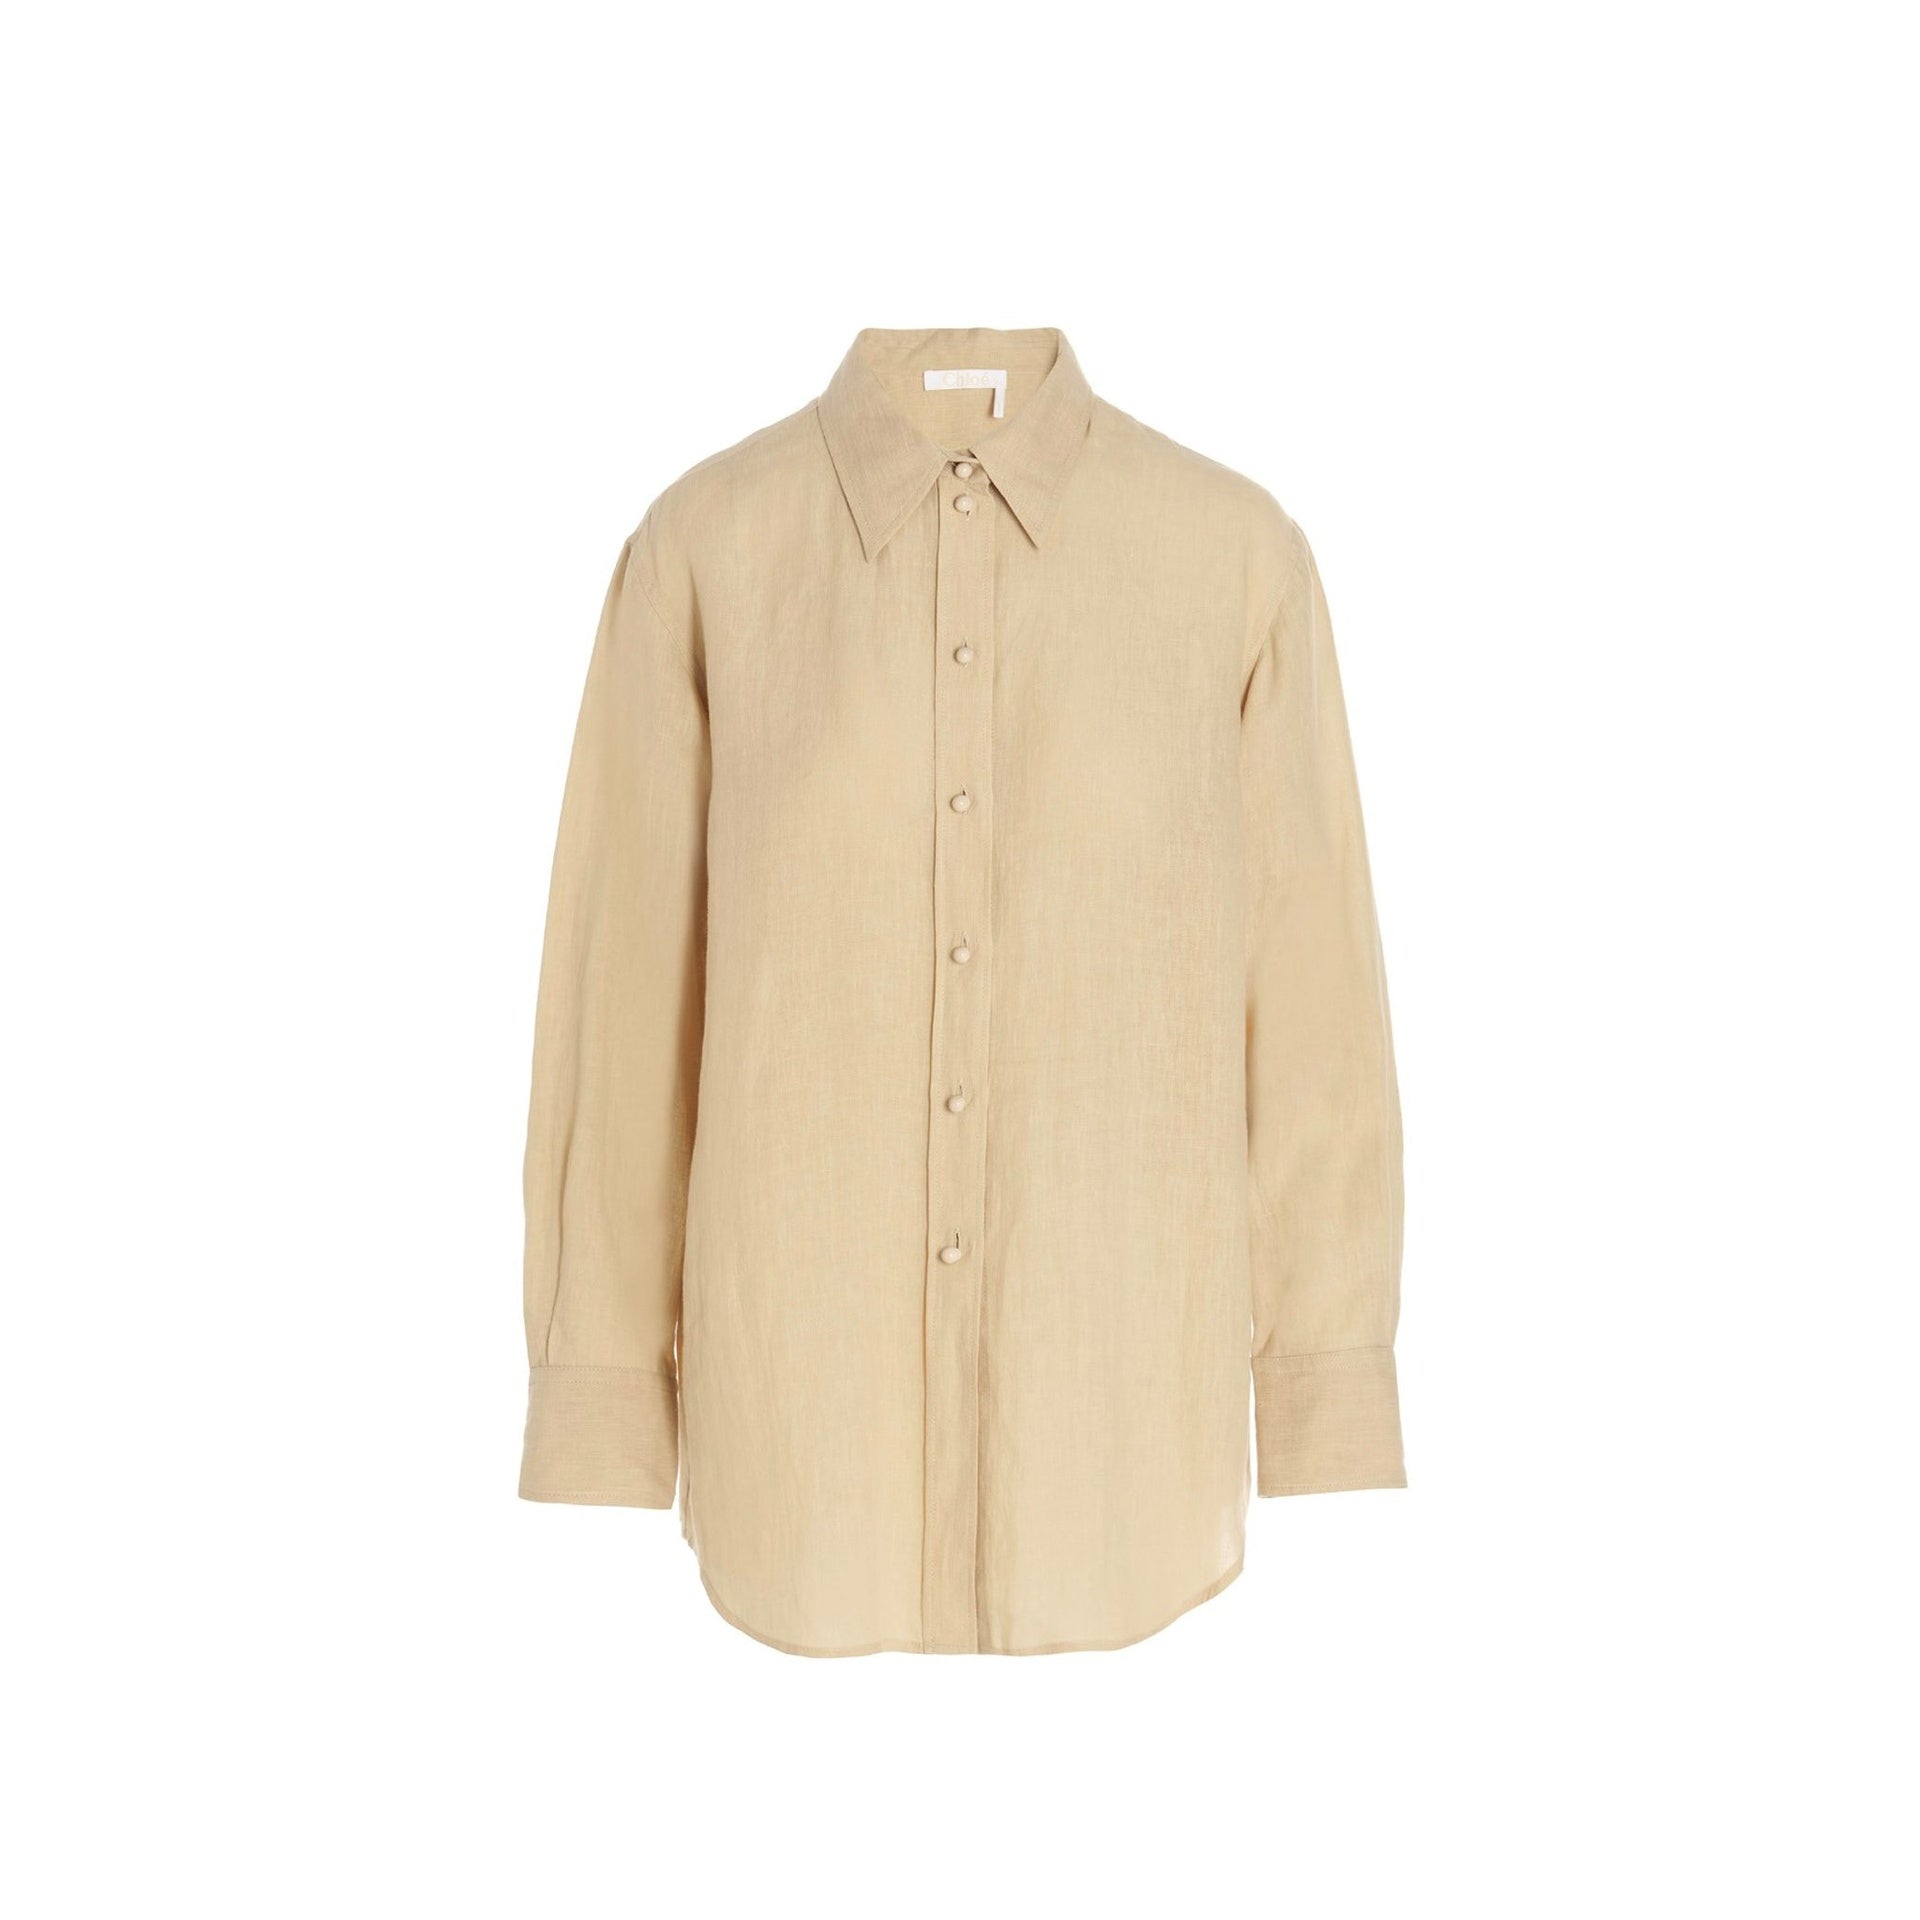 CHLOE-OUTLET-SALE-Chloe-Linen-Shirt-Shirts-BROWN-42-ARCHIVE-COLLECTION.jpg